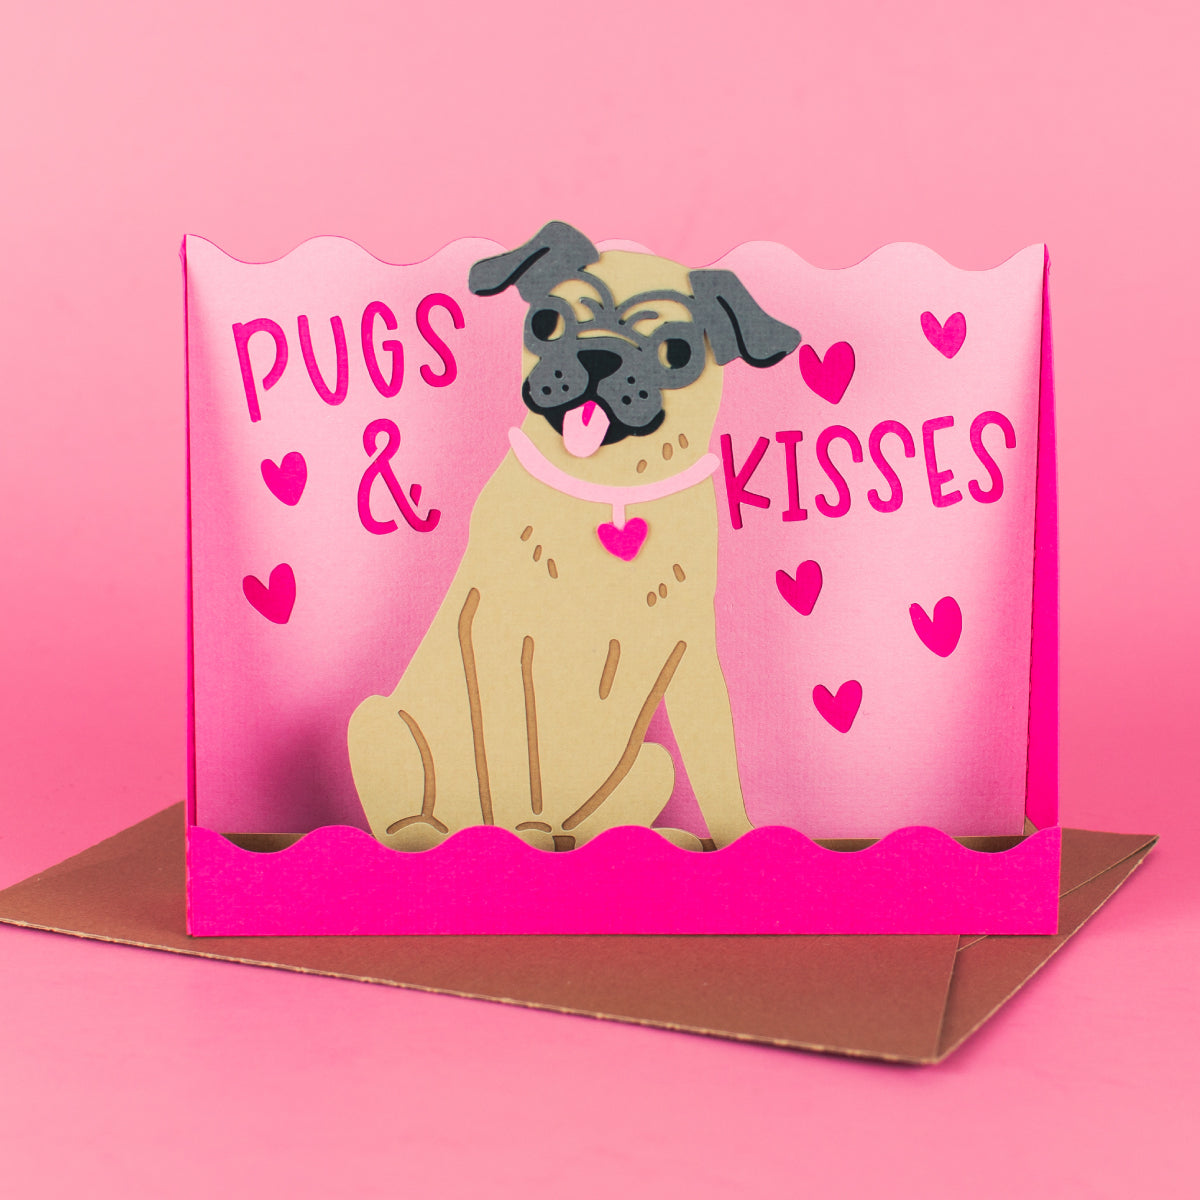 Pugs and Kisses Card SVG